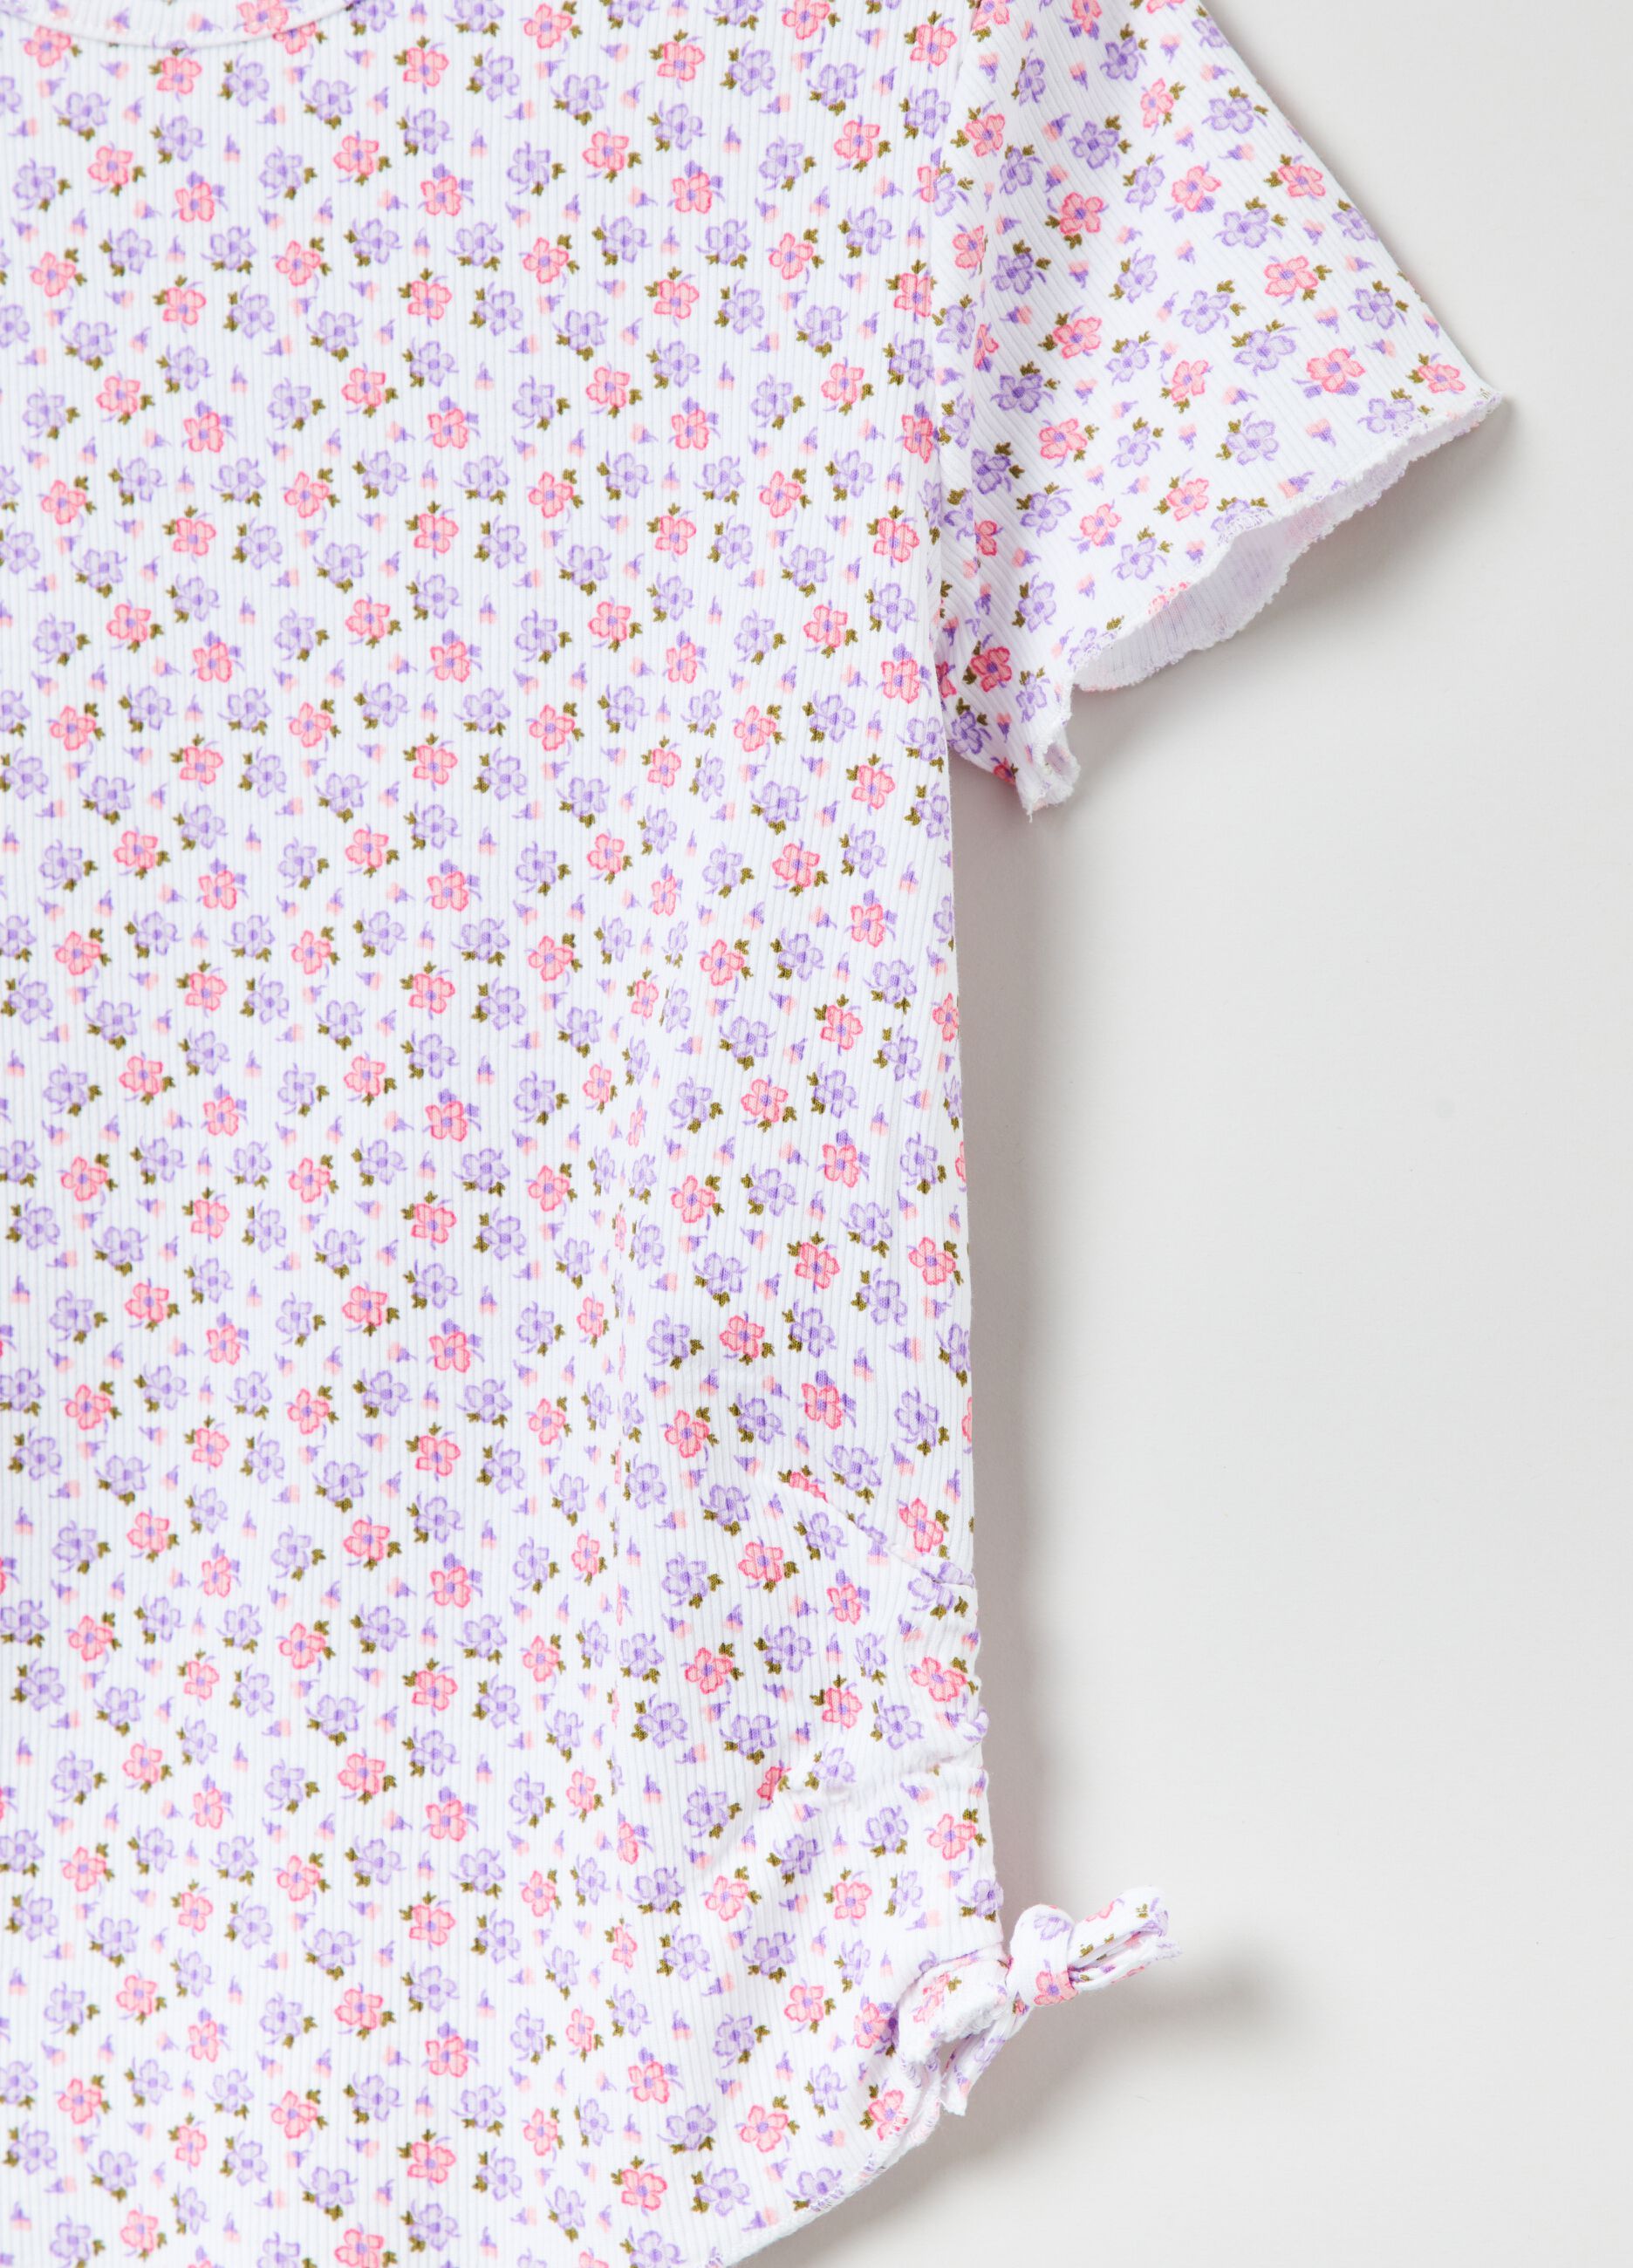 Ribbed T-shirt with ditsy floral print